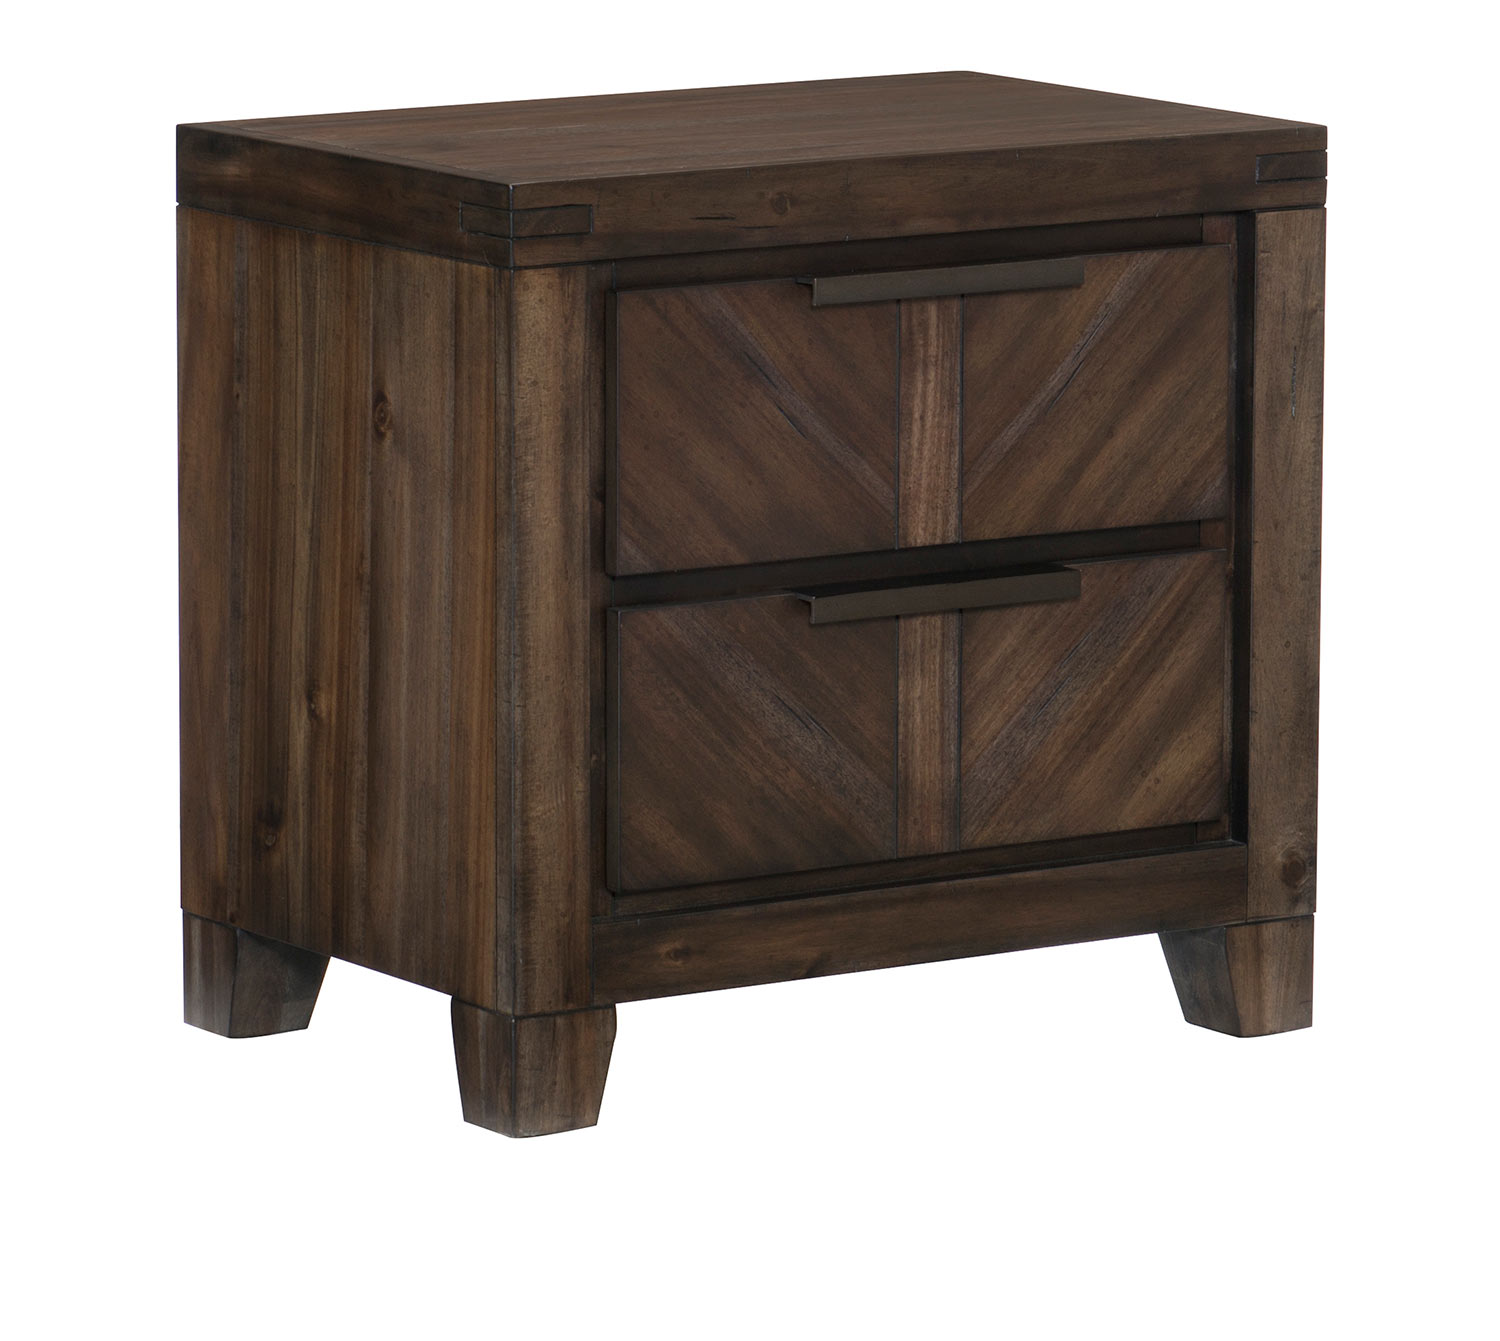 Homelegance Parnell Night Stand - Rustic Cherry